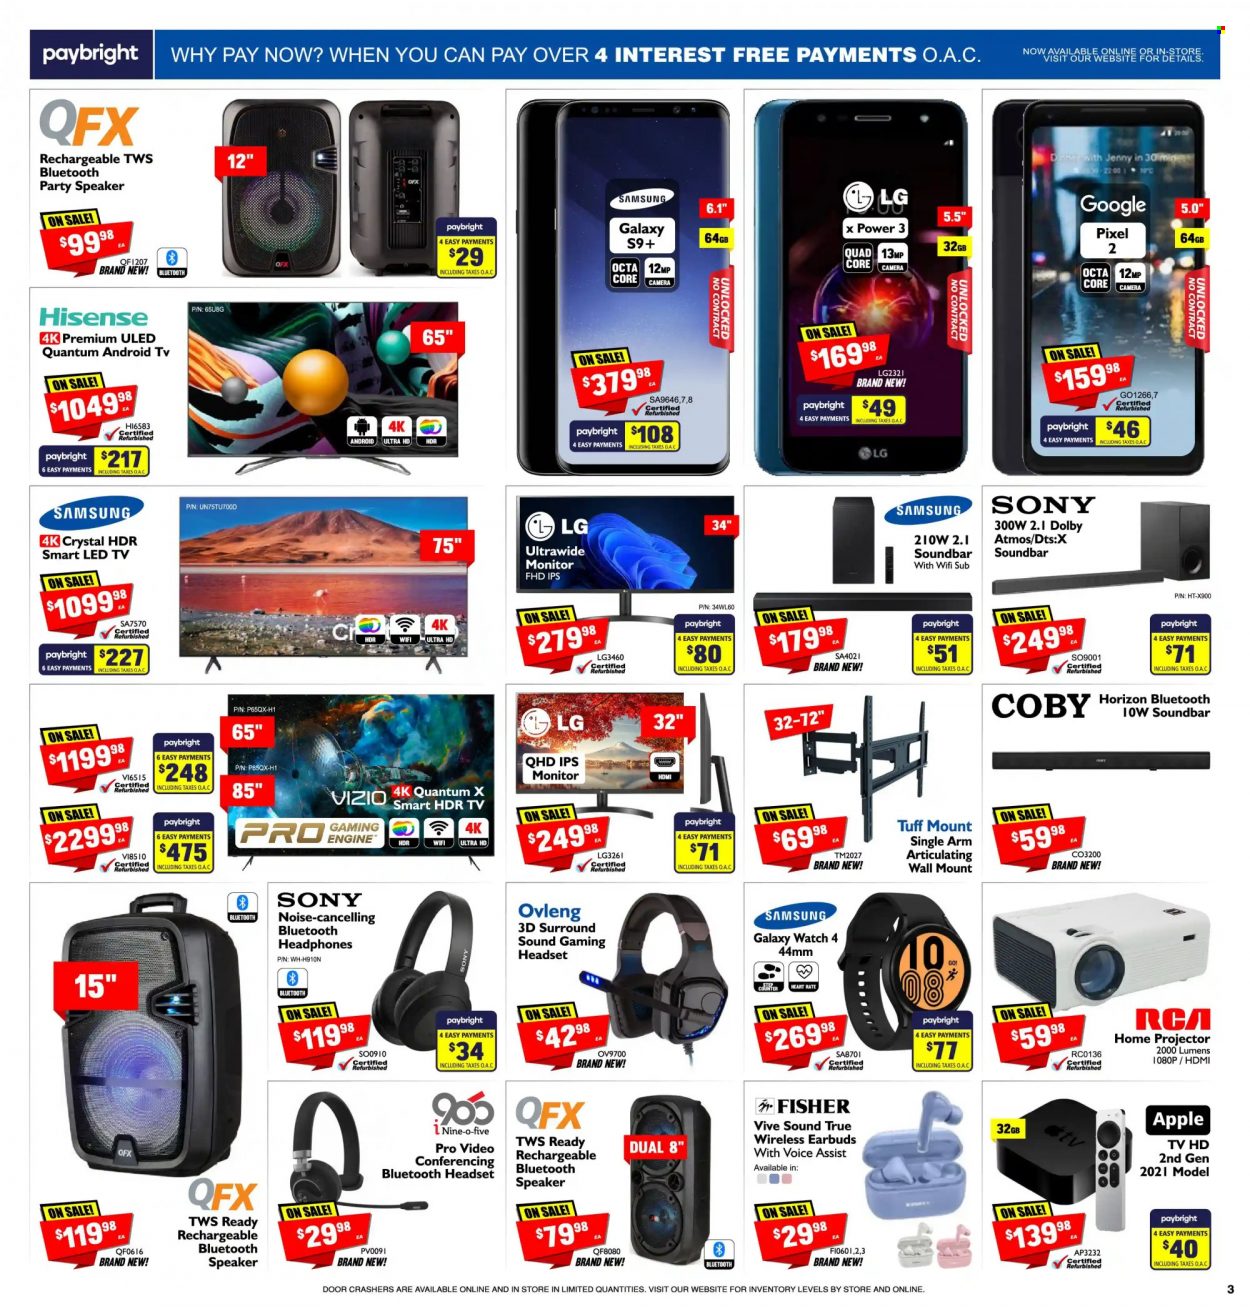 thumbnail - Factory Direct Flyer - January 05, 2022 - January 11, 2022 - Sales products - Sony, gaming headset, Apple, Vizio, Samsung Galaxy, pin, Samsung Galaxy Watch, RCA, Android TV, UHD TV, ultra hd, TV, projector, speaker, bluetooth speaker, sound bar, headset, headphones, earbuds, camera, LED TV, monitor, Hisense. Page 3.